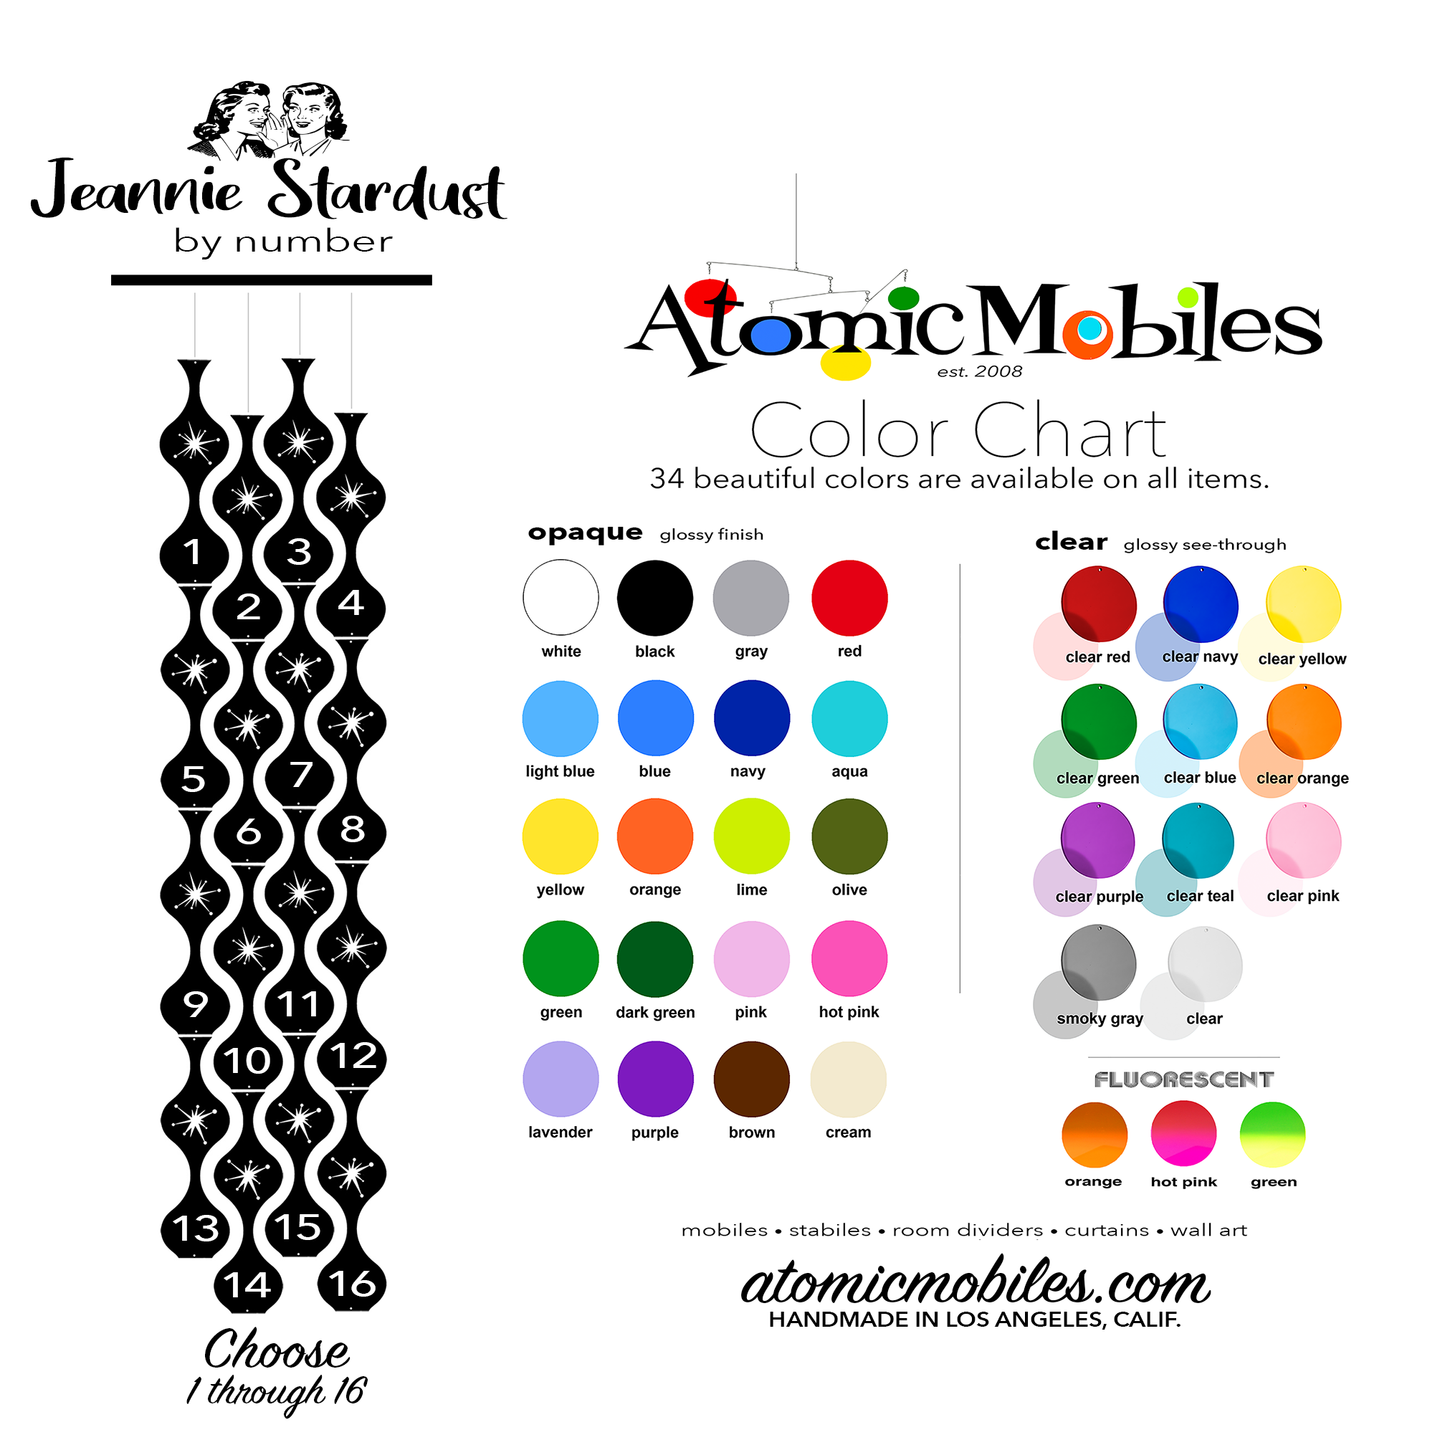 Jeannie Stardust Hanging Art Mobiles Color Chart for 34 Custom Colors that YOU choose for your mid century modern inspired home decor by AtomicMobiles.com